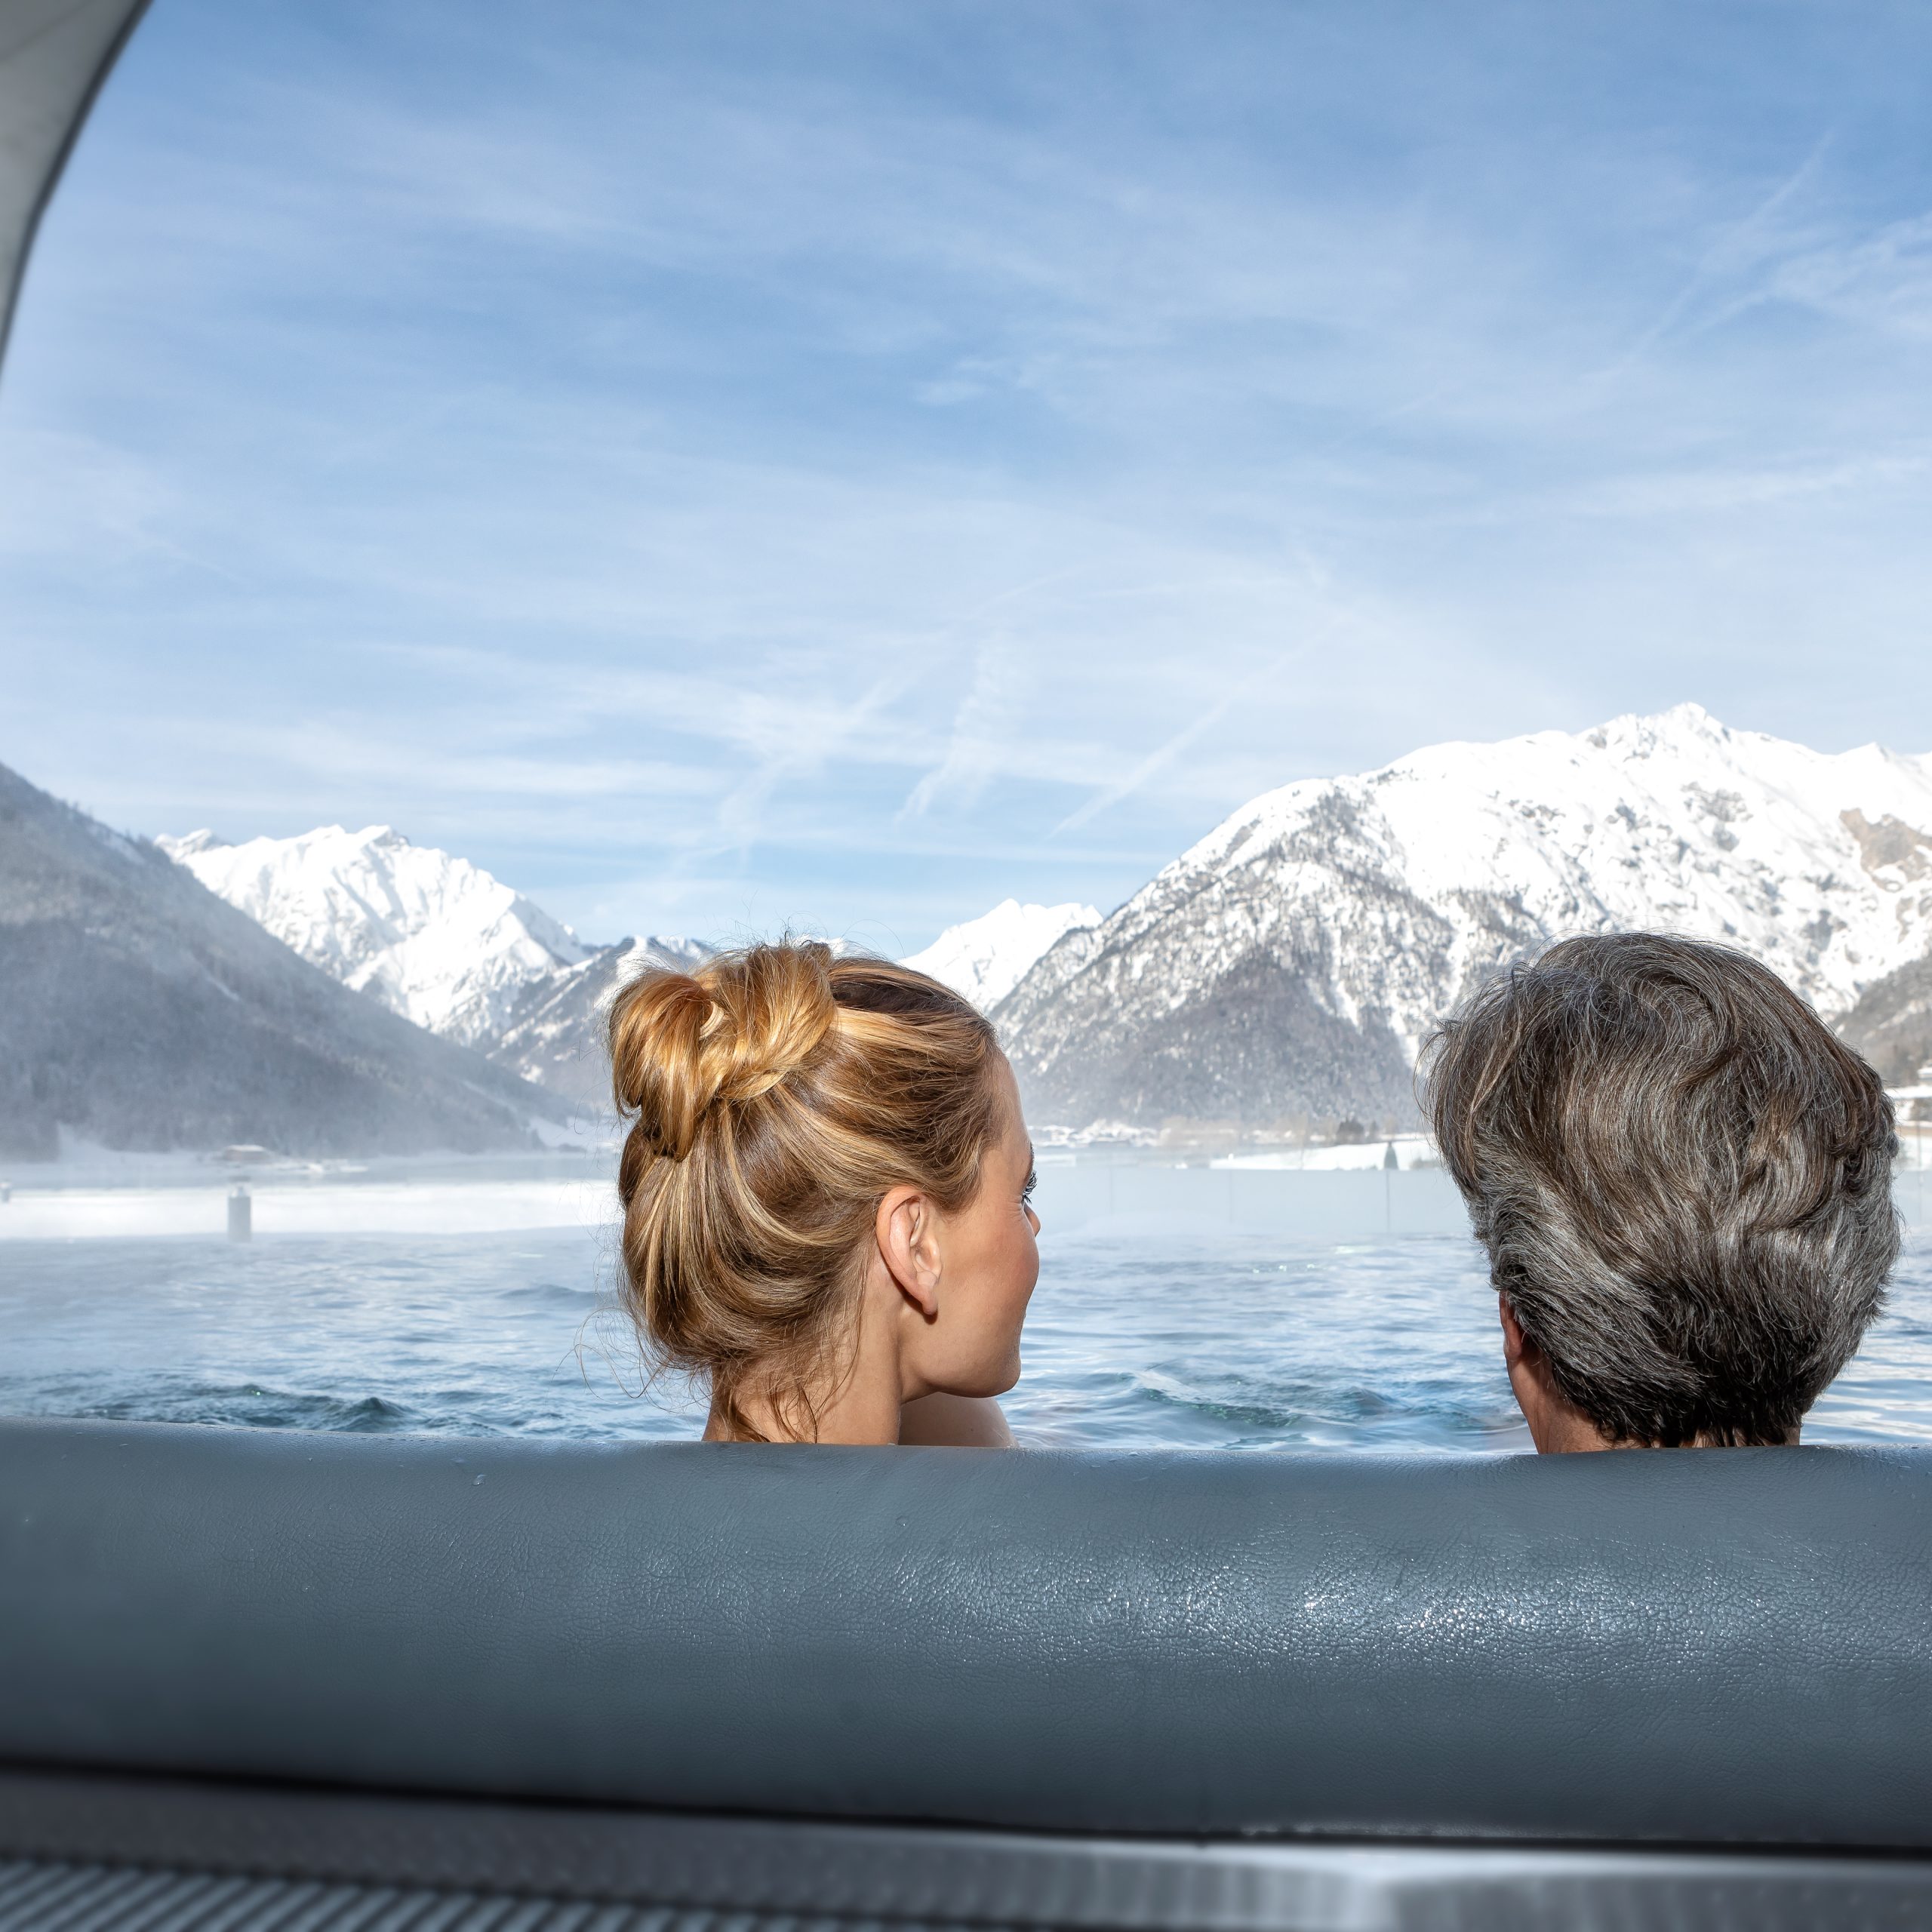 Mindful escapes to Austria to improve your health and wellbeing this winter